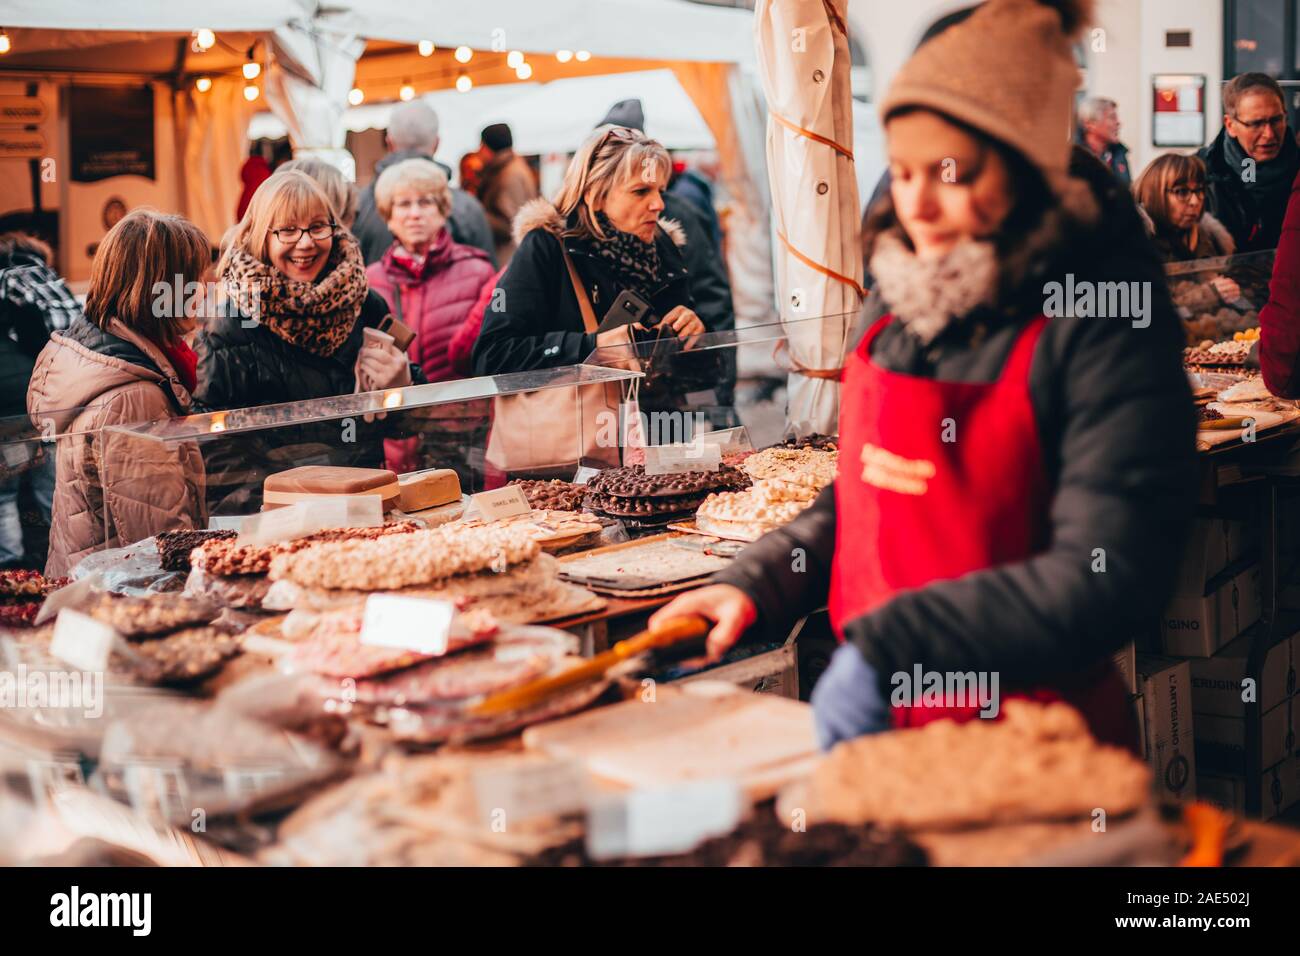 Tübingen, Germany - December 6, 2019: Chocolate market chocolART with christmas booths and stalls with many people standing in crowds drinking mulled Stock Photo